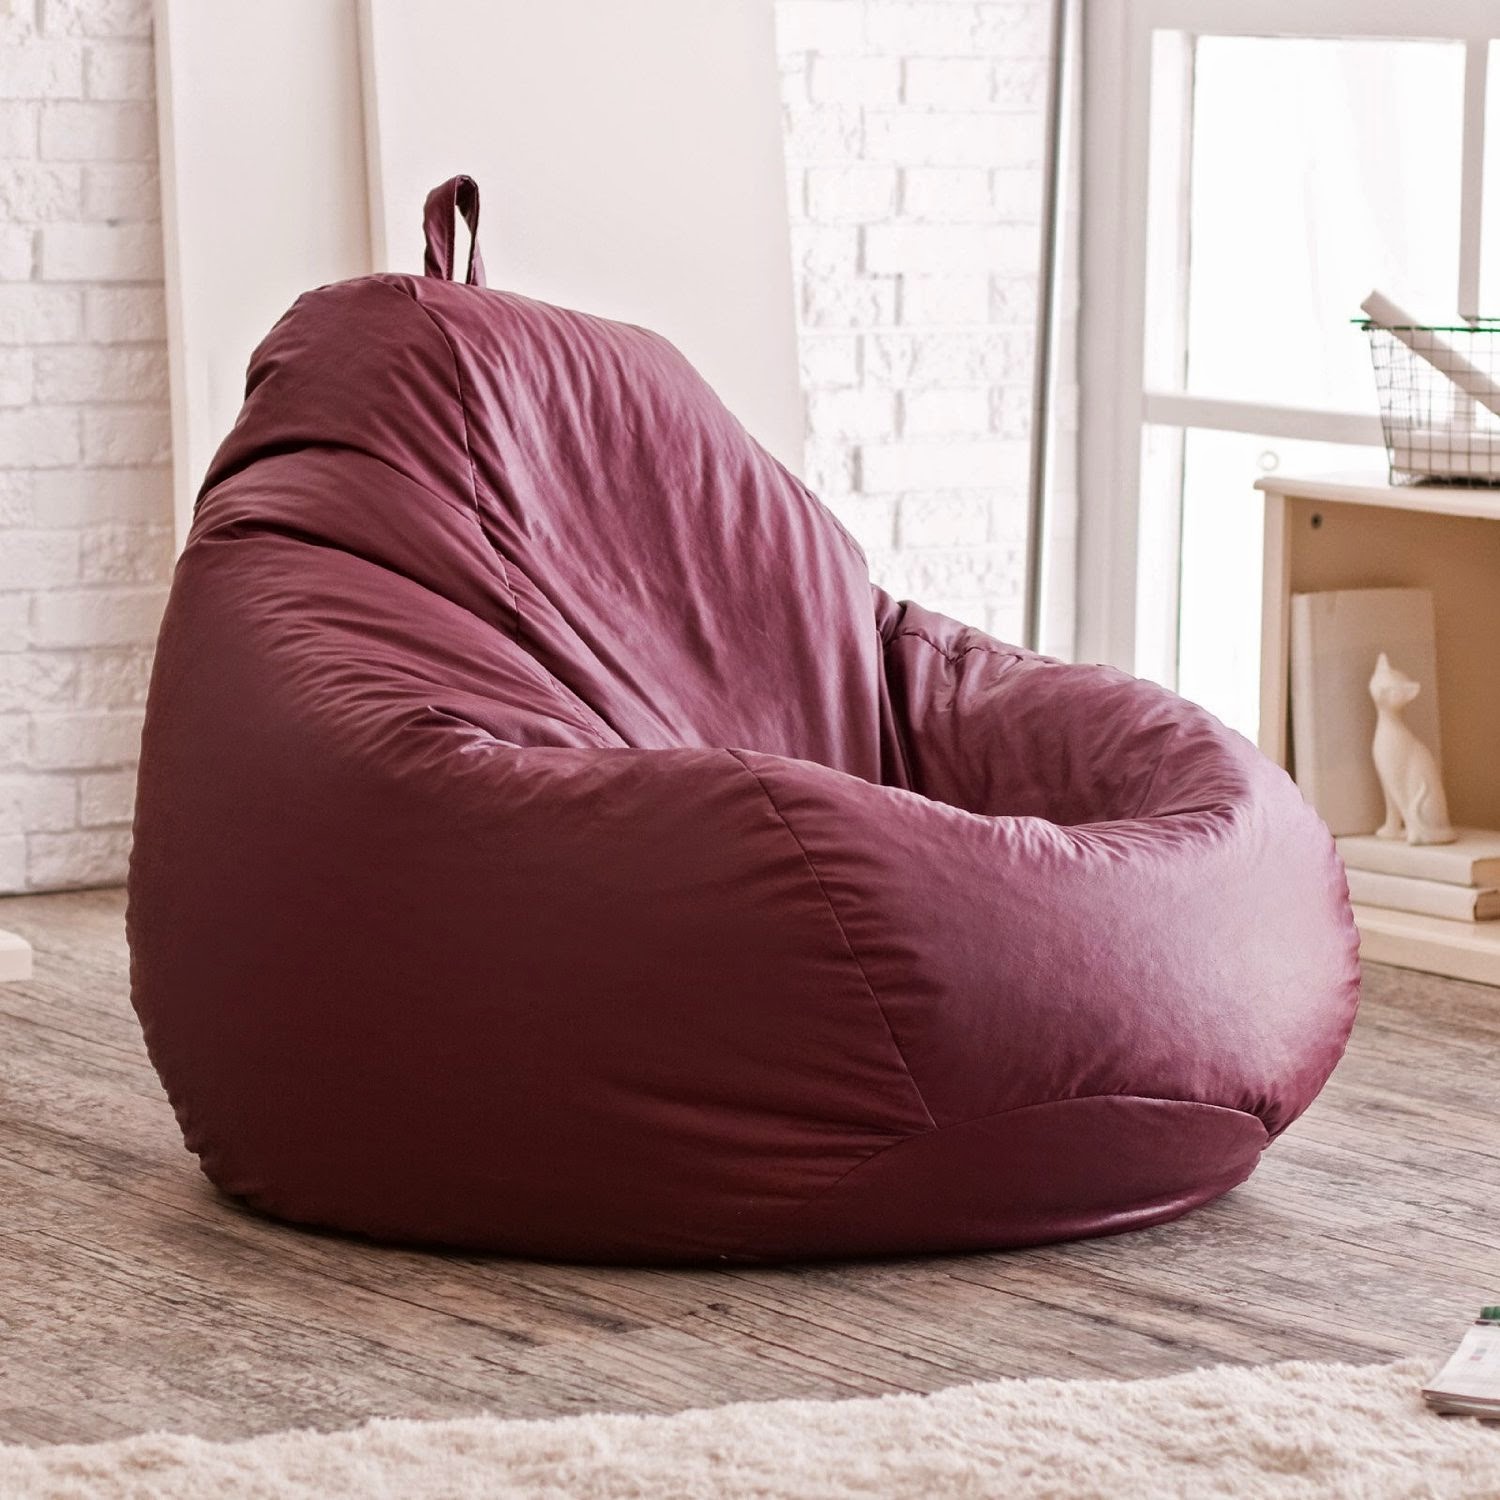 About Vinyl Bean Bag Chairs | Home Design Inspiration and Wedding Ideas